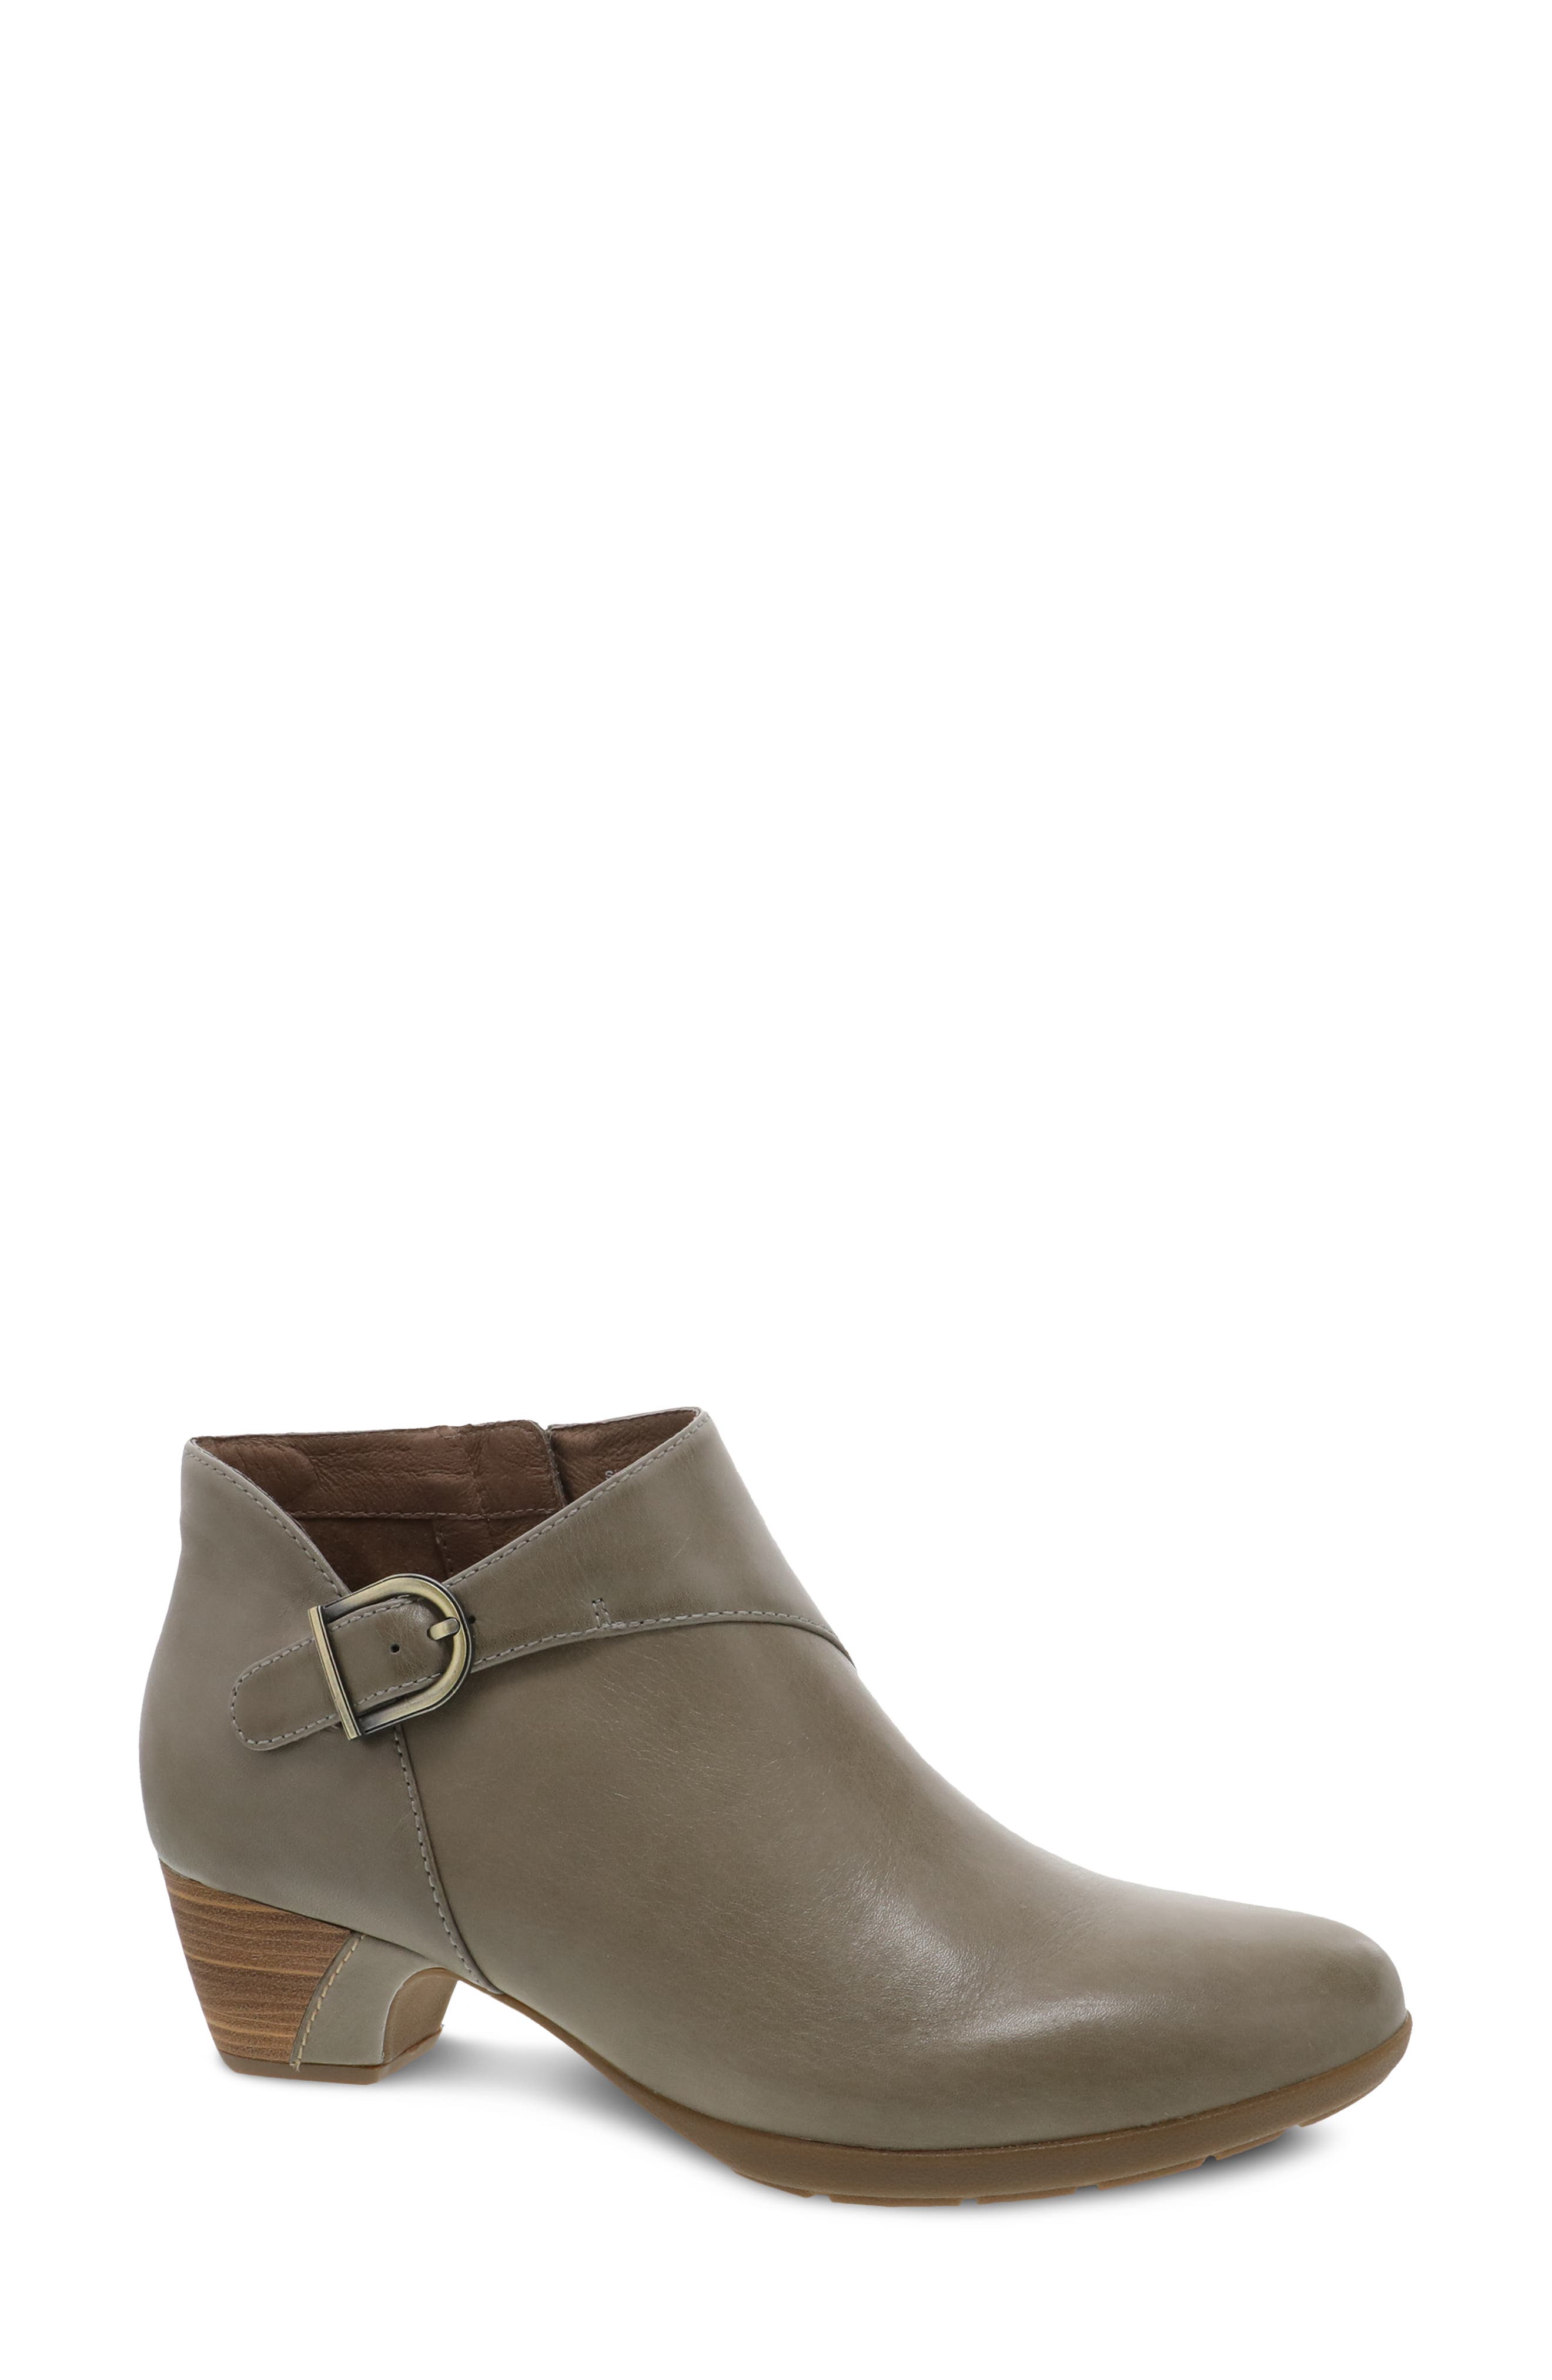 nordstrom gray boots